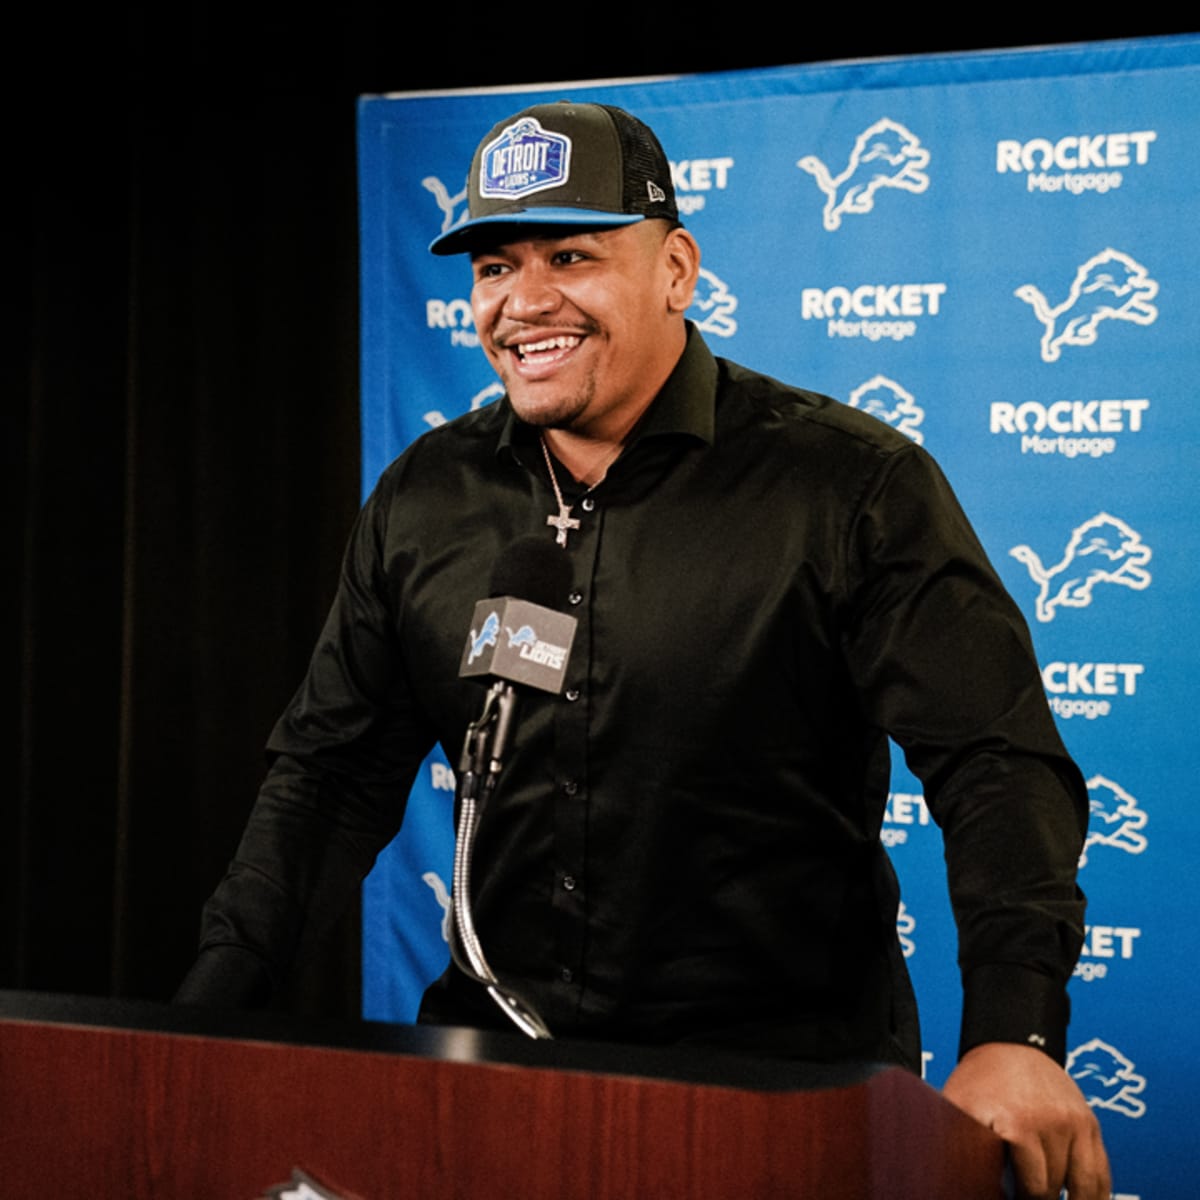 2022 Detroit Lions rookie jersey numbers revealed - Pride Of Detroit